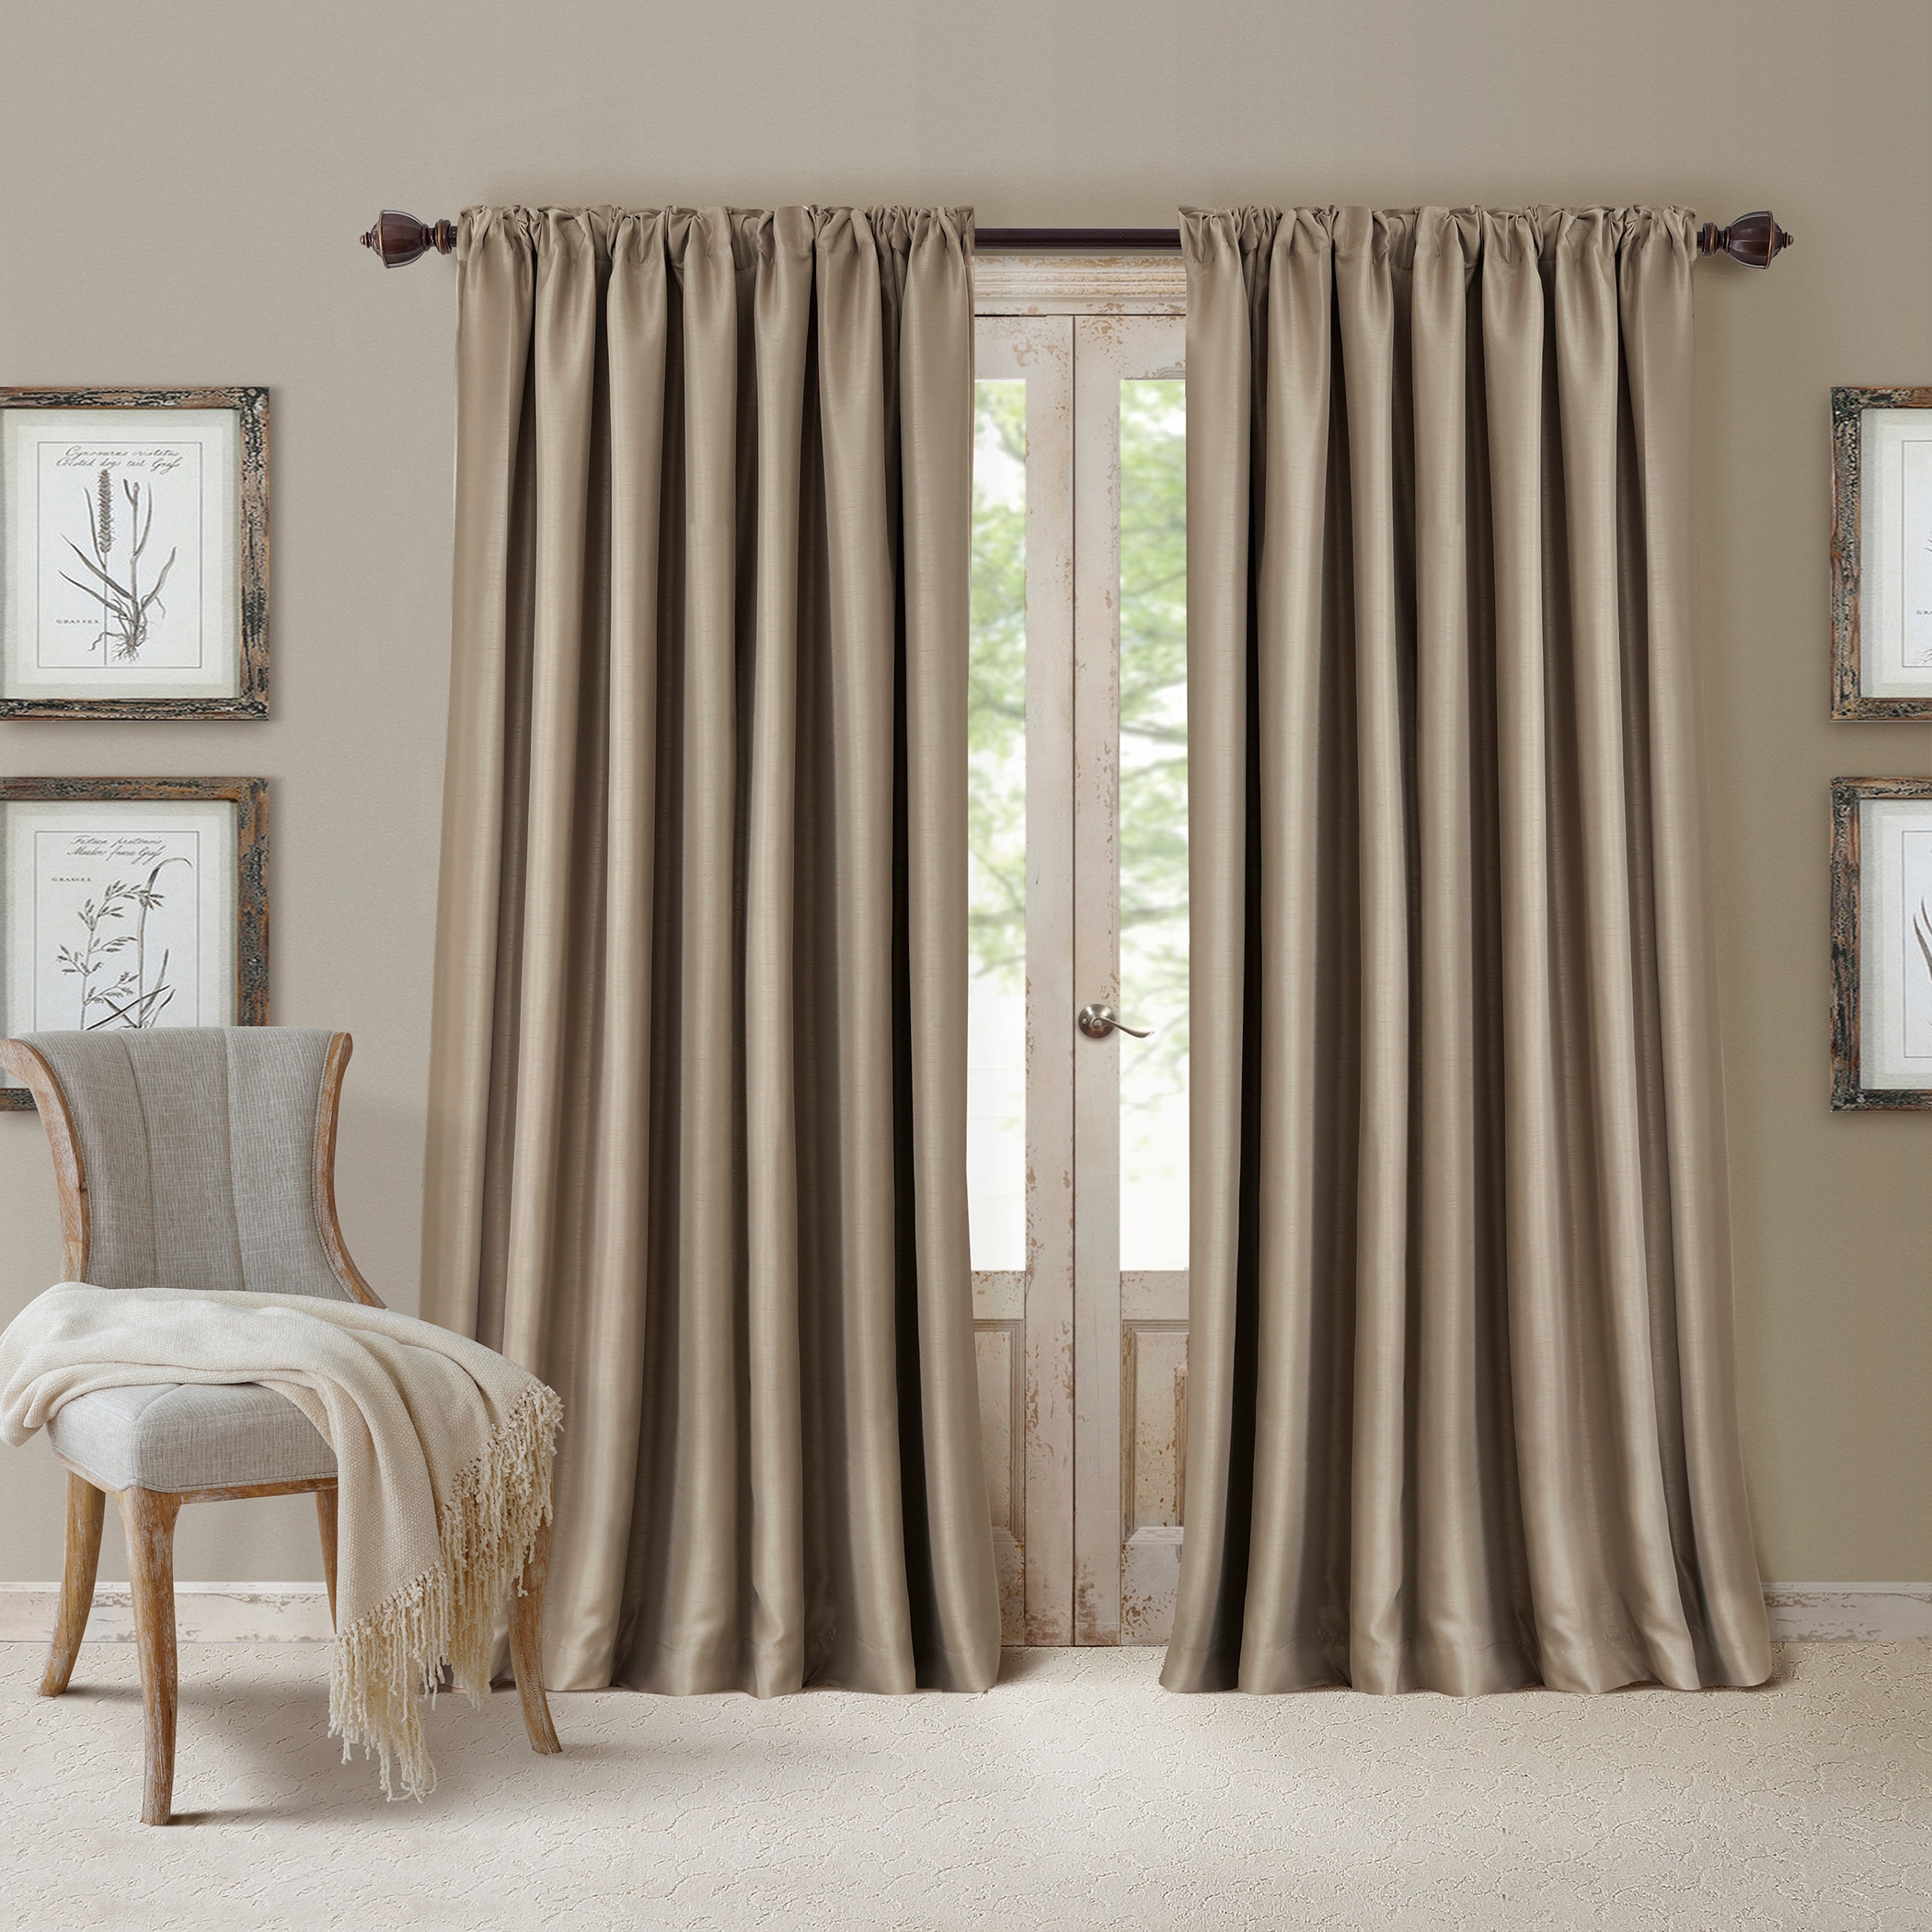 Elrene Home Fashions 108-in Panel Curtain Interlined Single the Blackout Pocket Drapes in at & department Curtains Taupe Rod